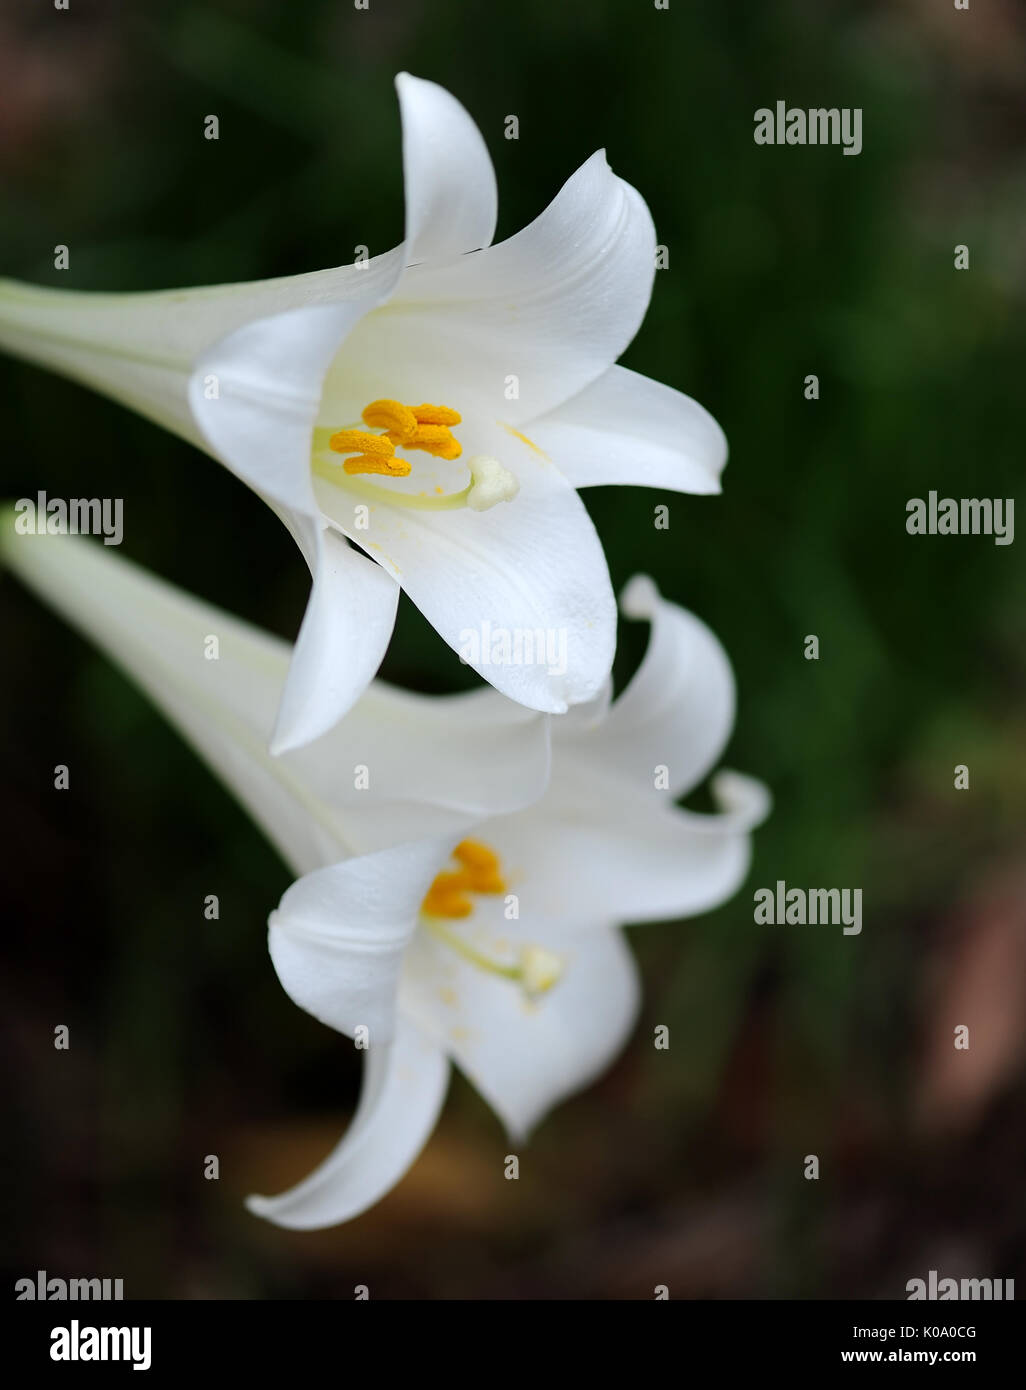 Common Easter lilies showing beautiful white petals against a dark background, known as ilium longiflorum. Stock Photo